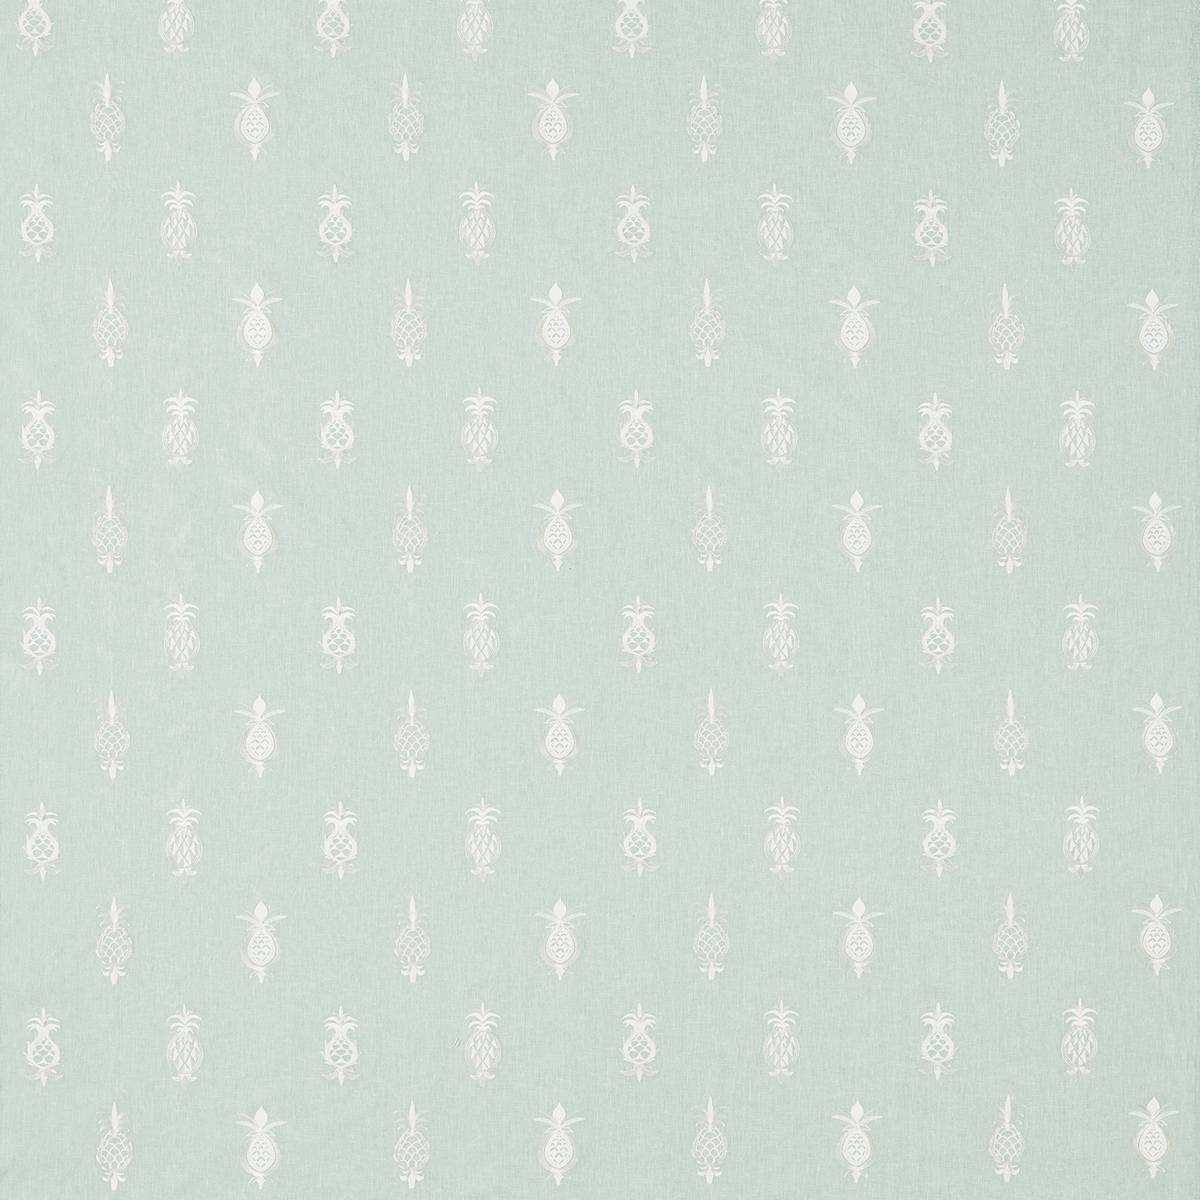 Pinery Teal Fabric by Sanderson